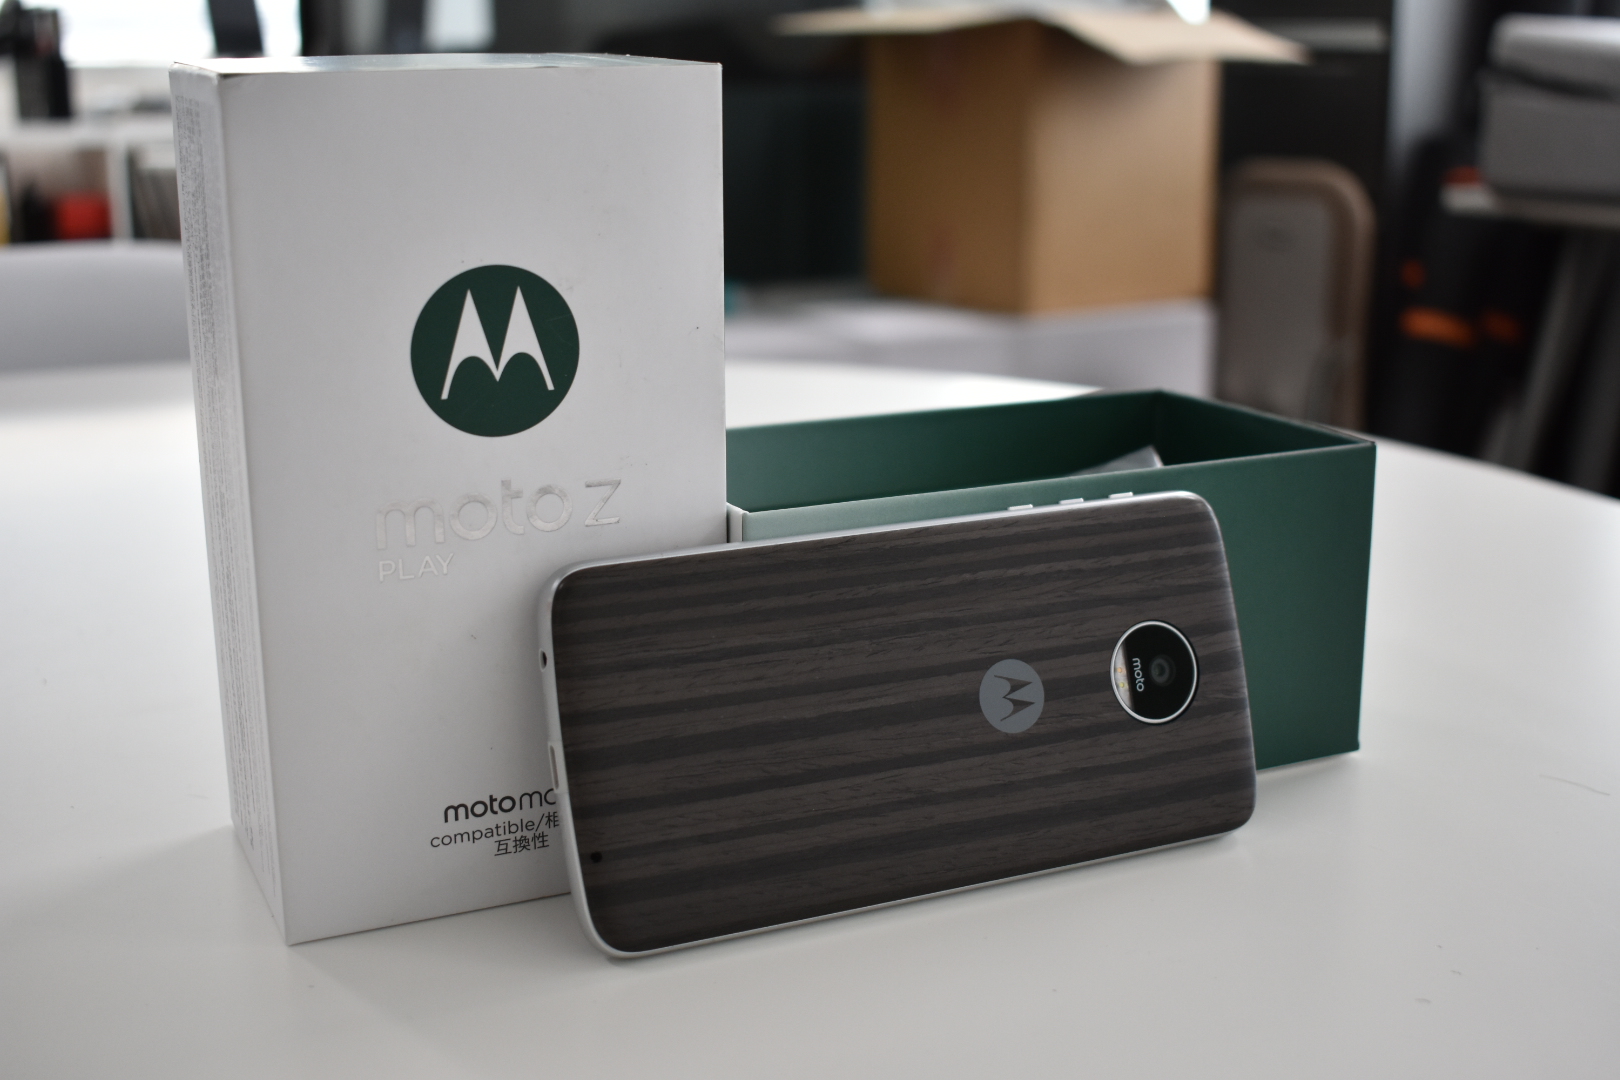 DSC 0132 Review: Moto Z Play Takes MotoMods To The Masses